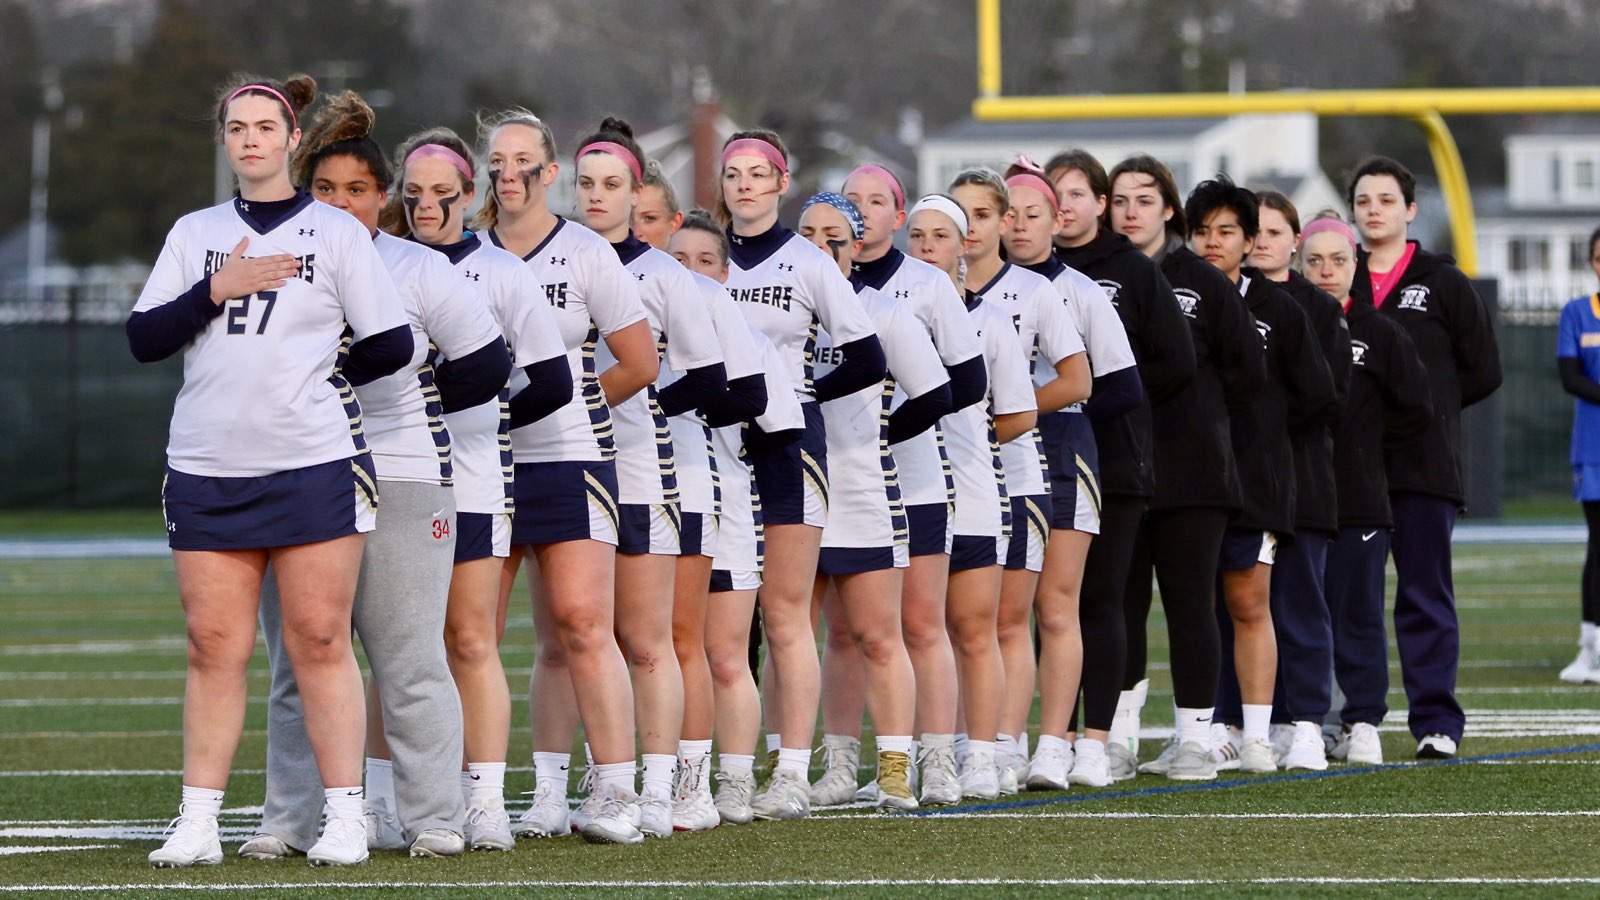 Women's Lacrosse: Bucs Loss Battle With Lancers in Conference Play